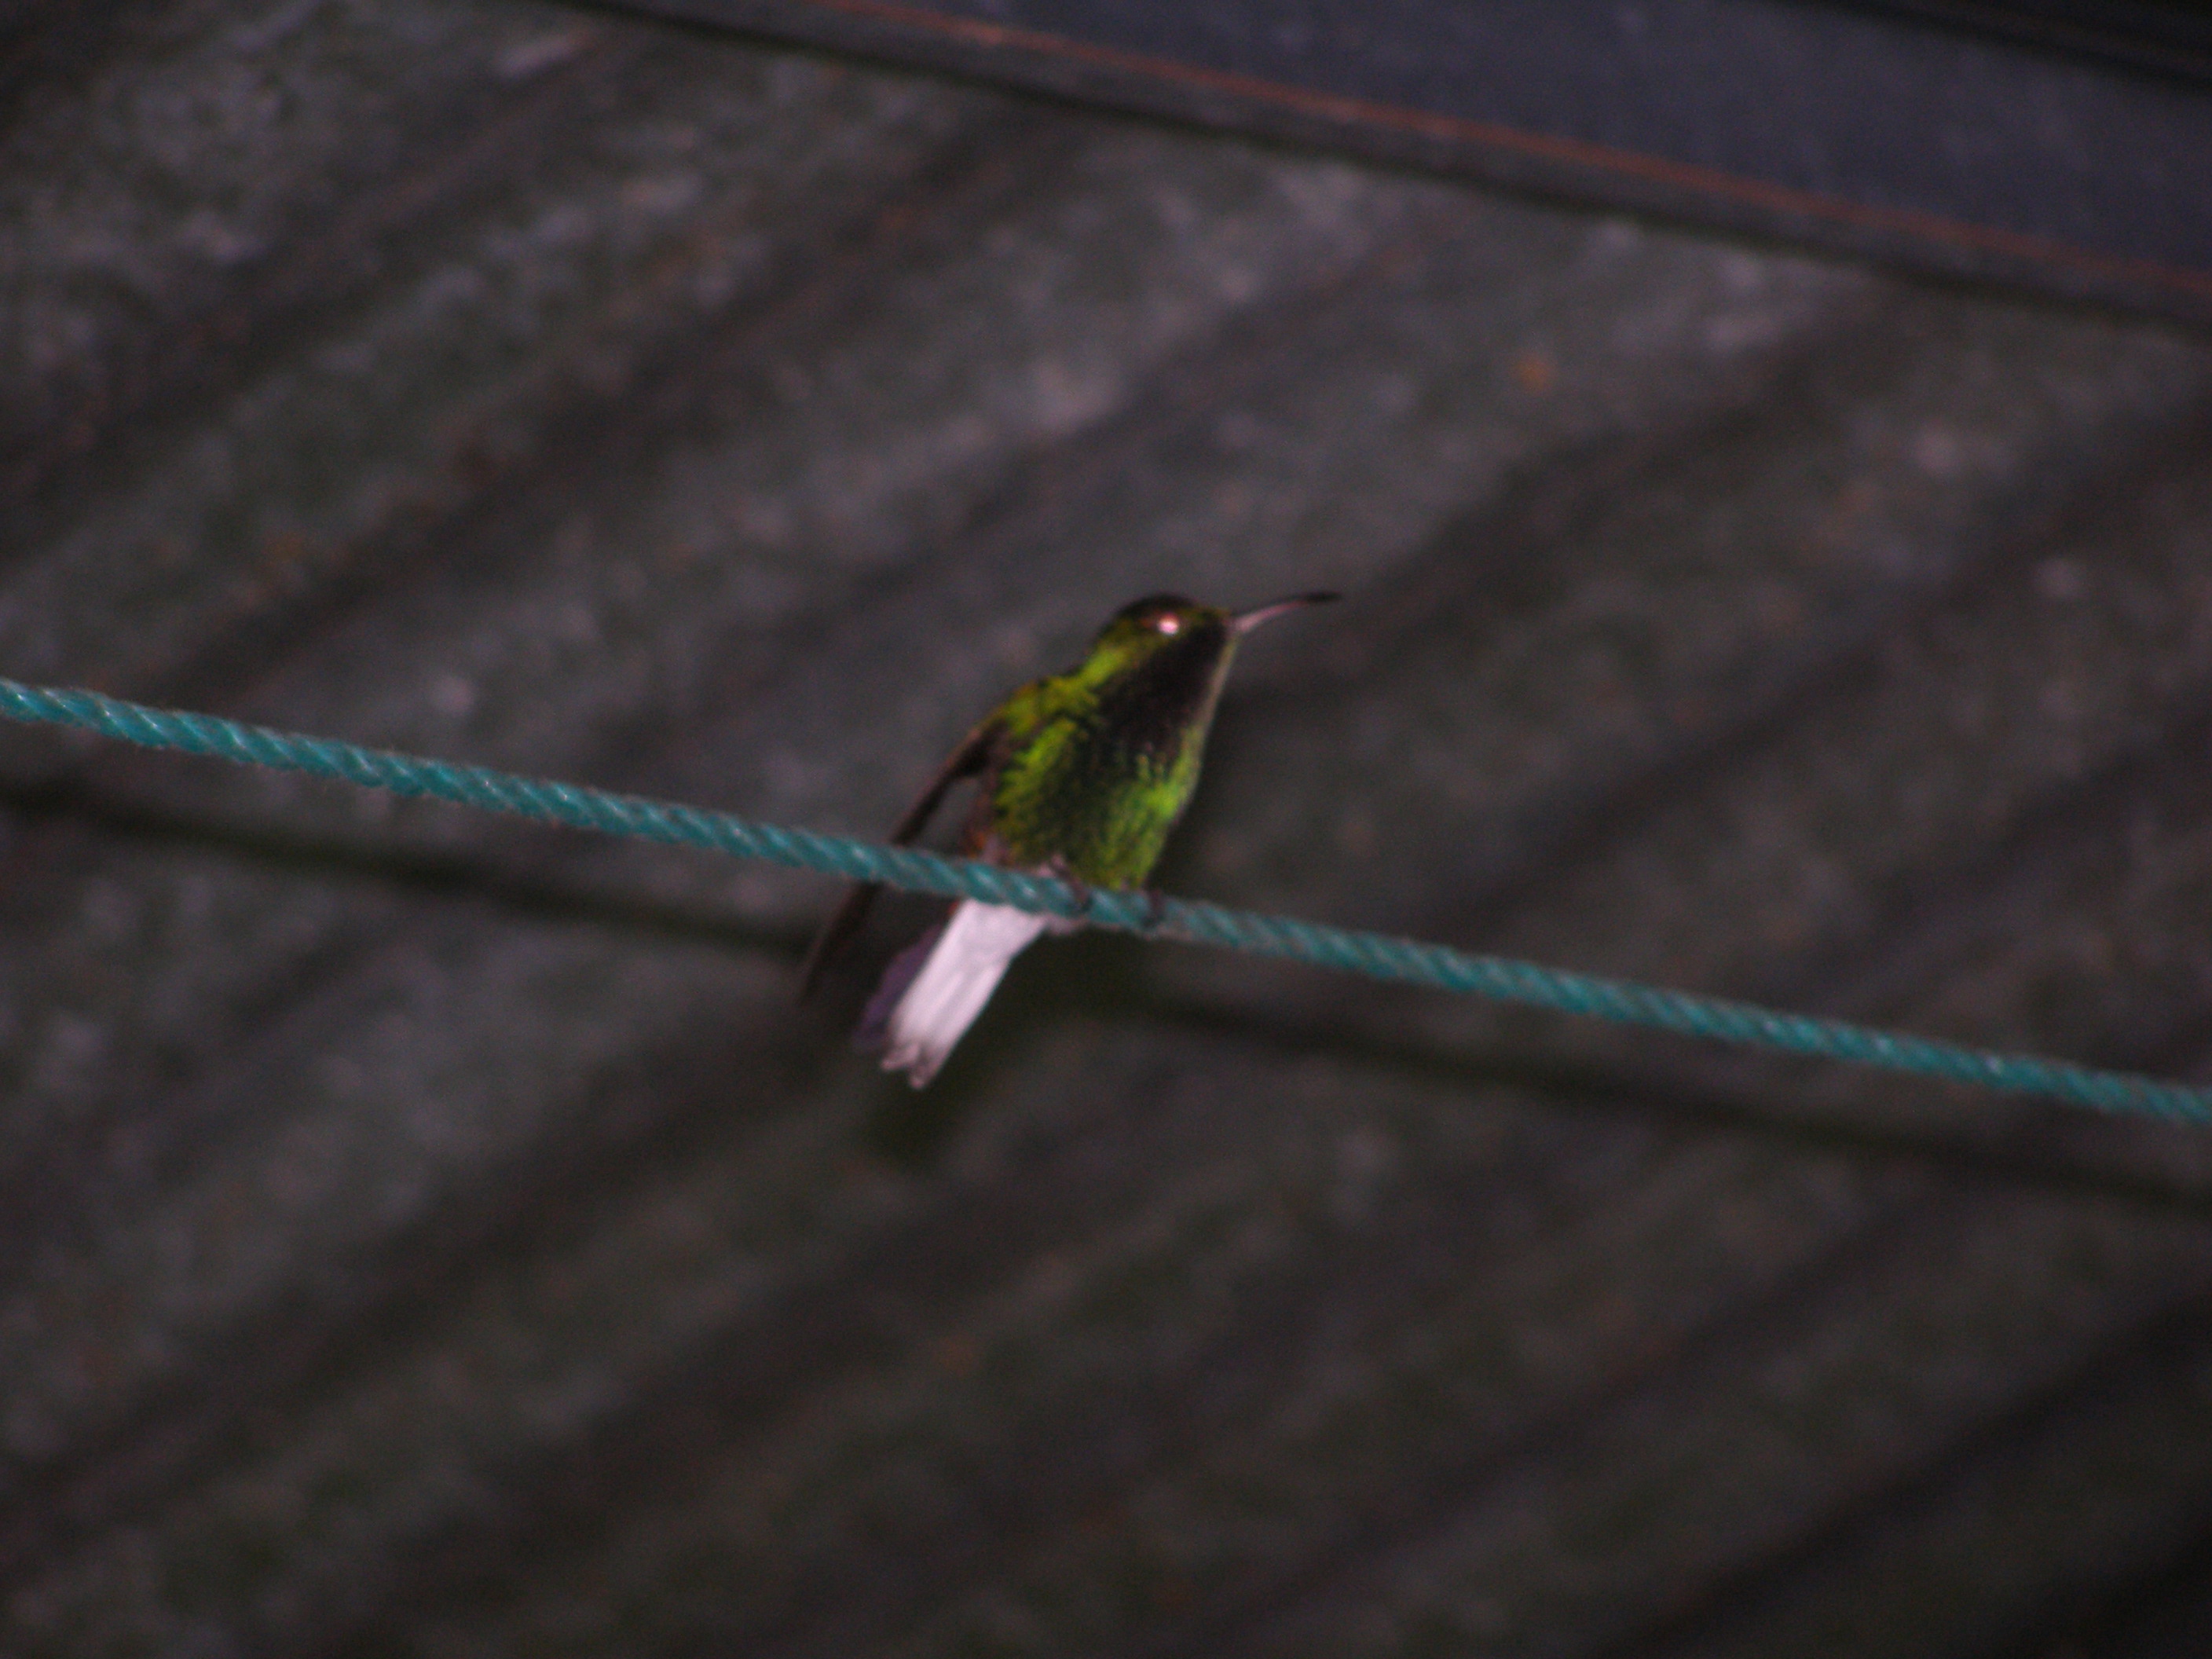 Click picture to see more Black-bellied Hummingbird photos.